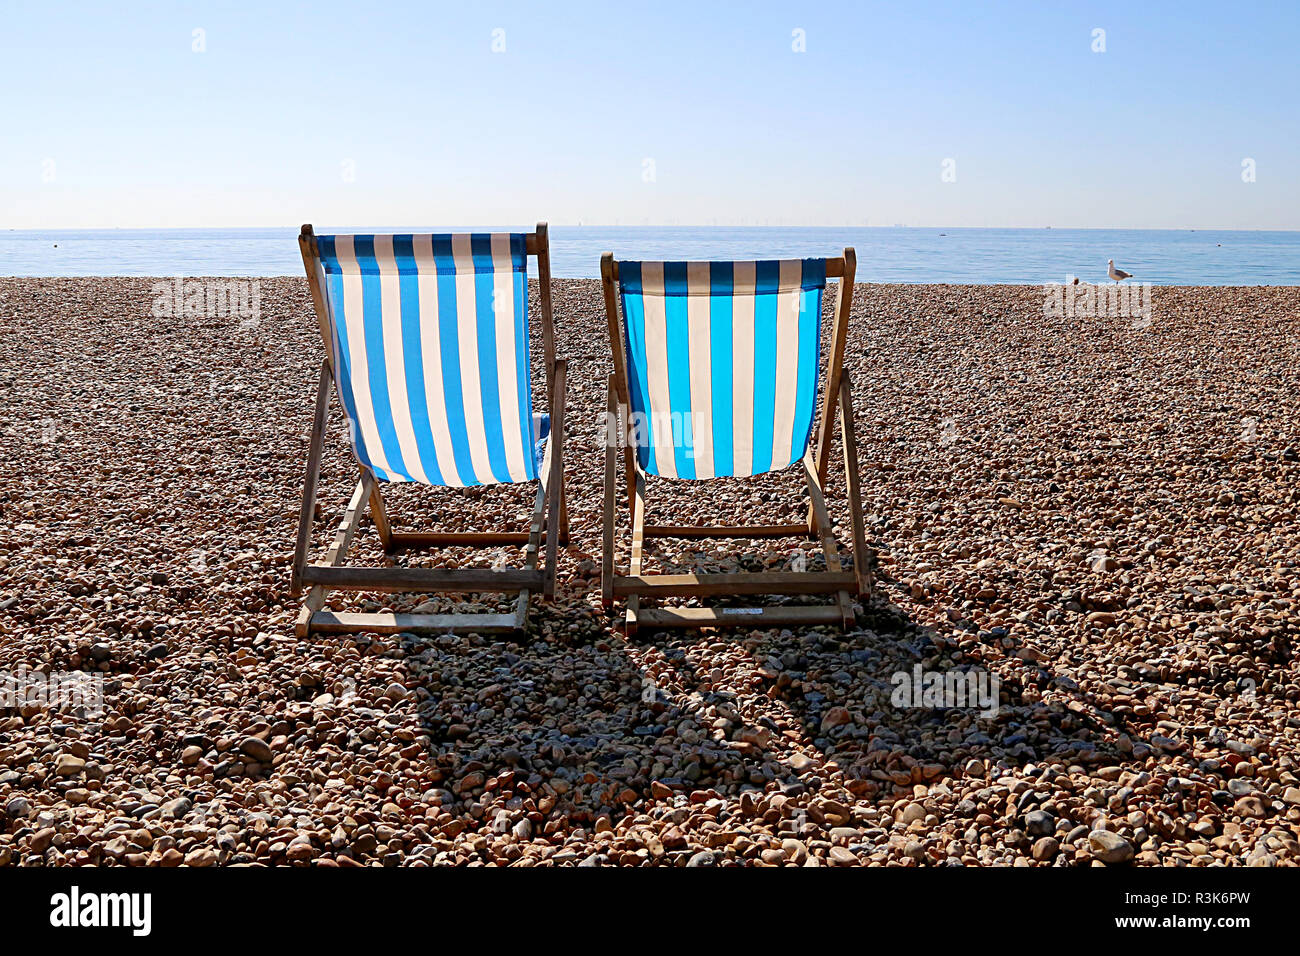 Two Empty Deckchairs and a Seagull on Brighton Beach. UK Stock Photo